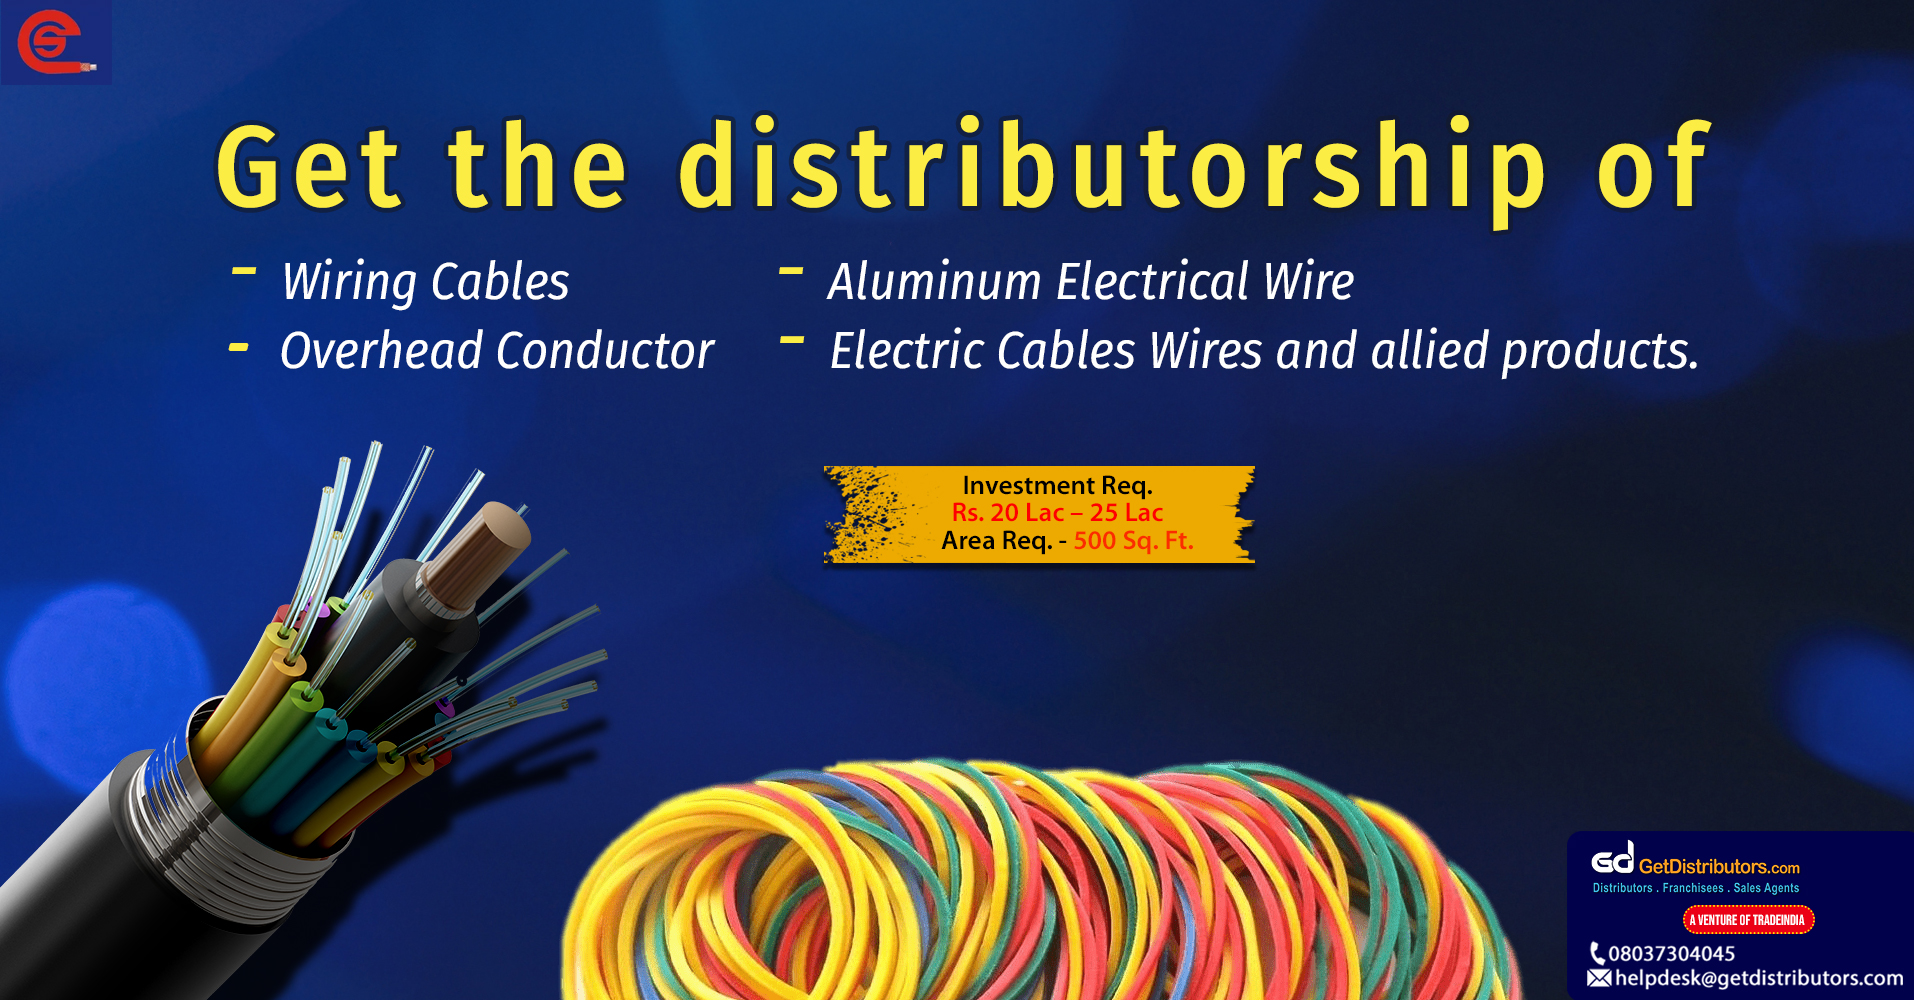 Premium wires and cables for distribution